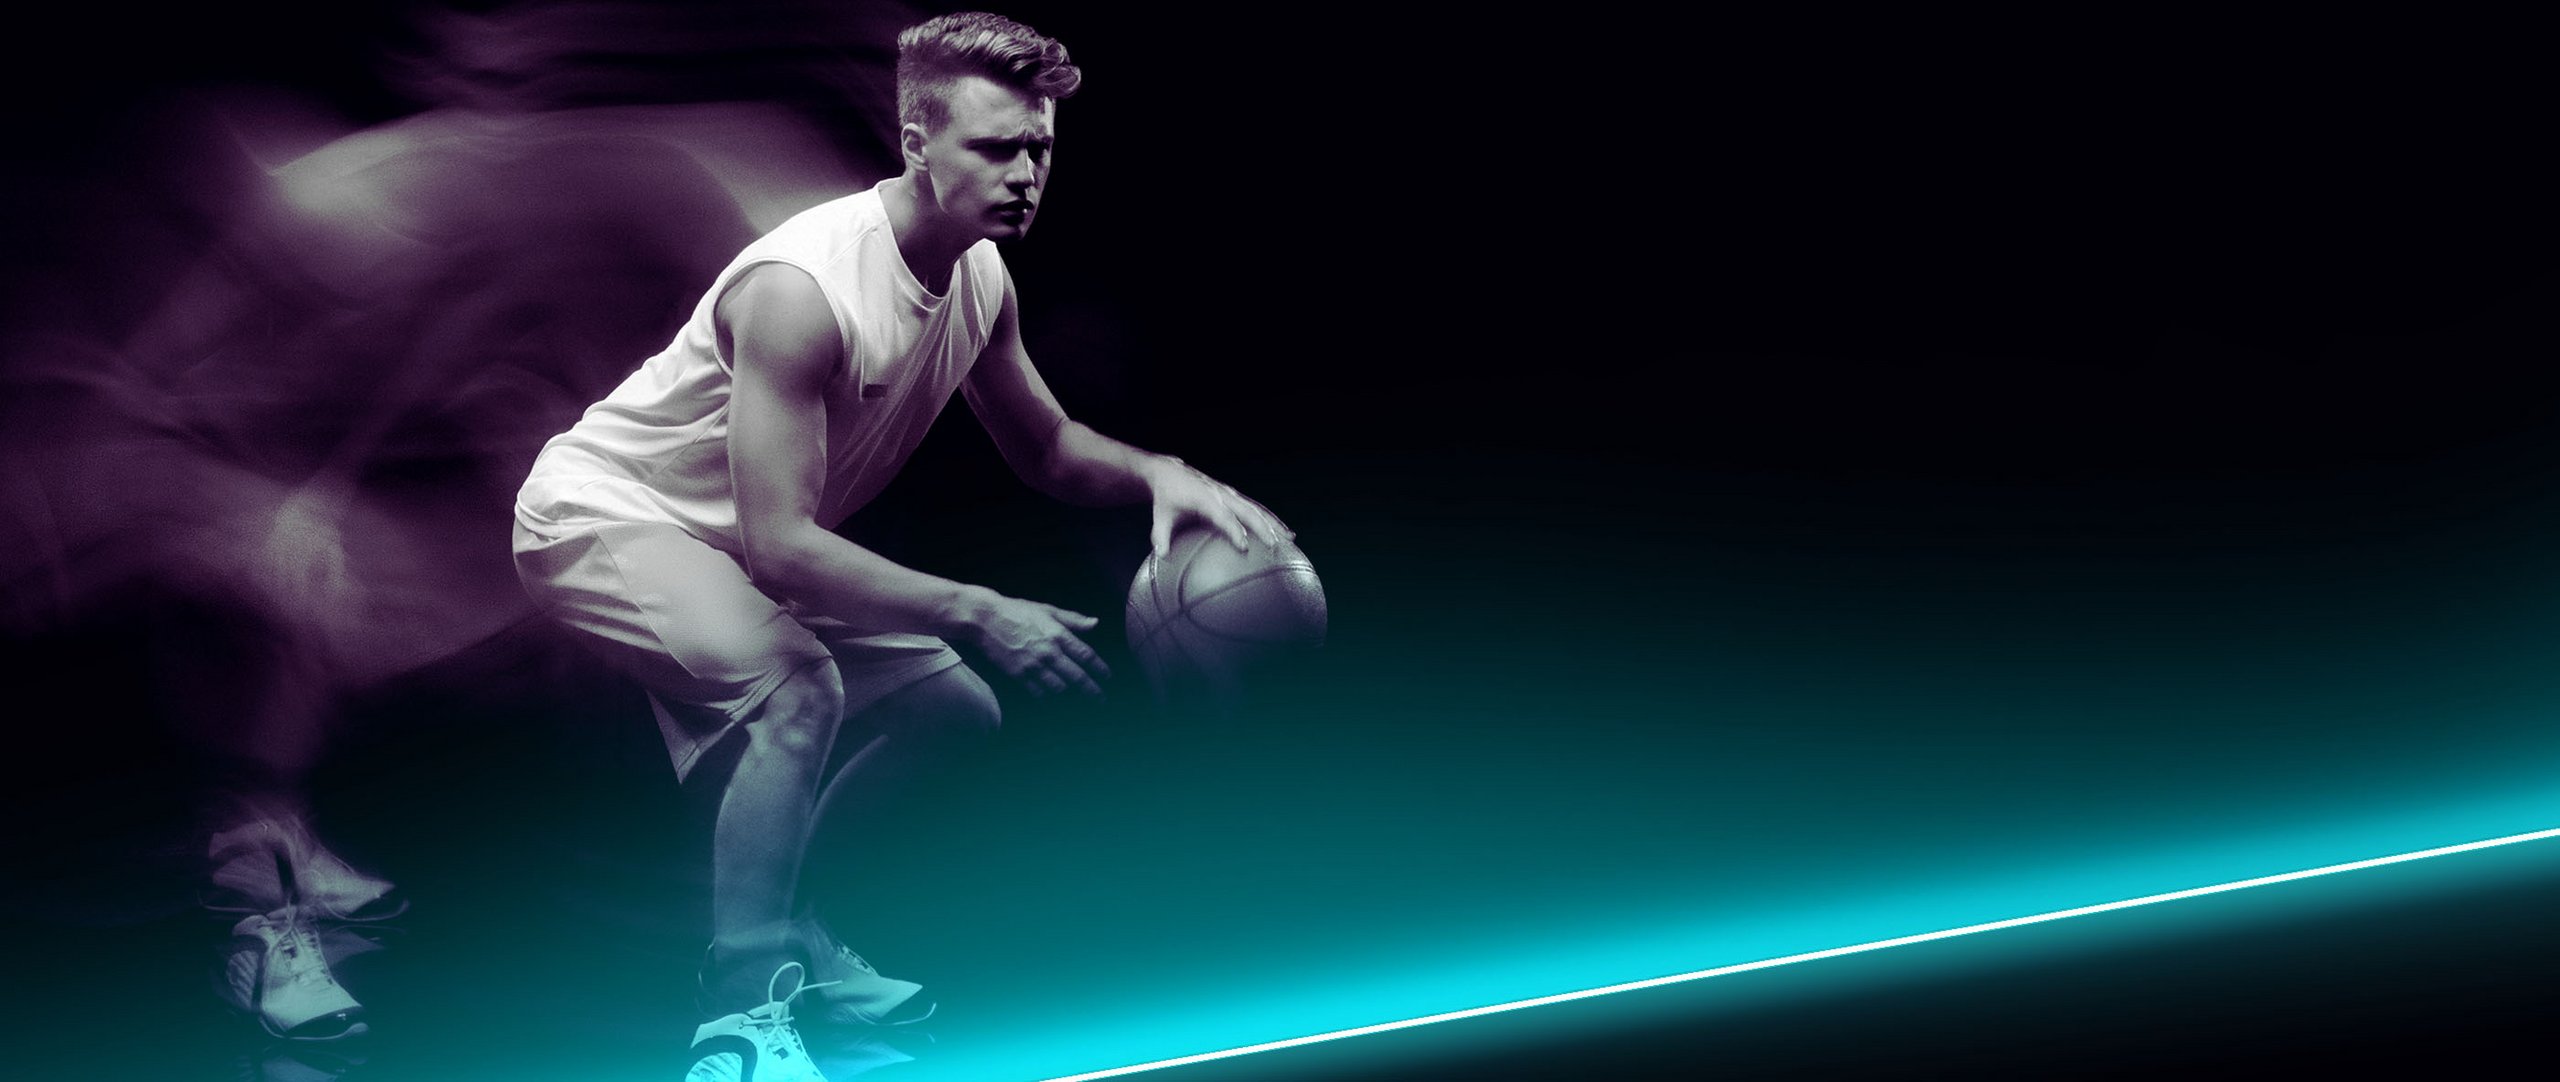 Basketball player on Skrill VIP dark purple background with neon line, VIP support